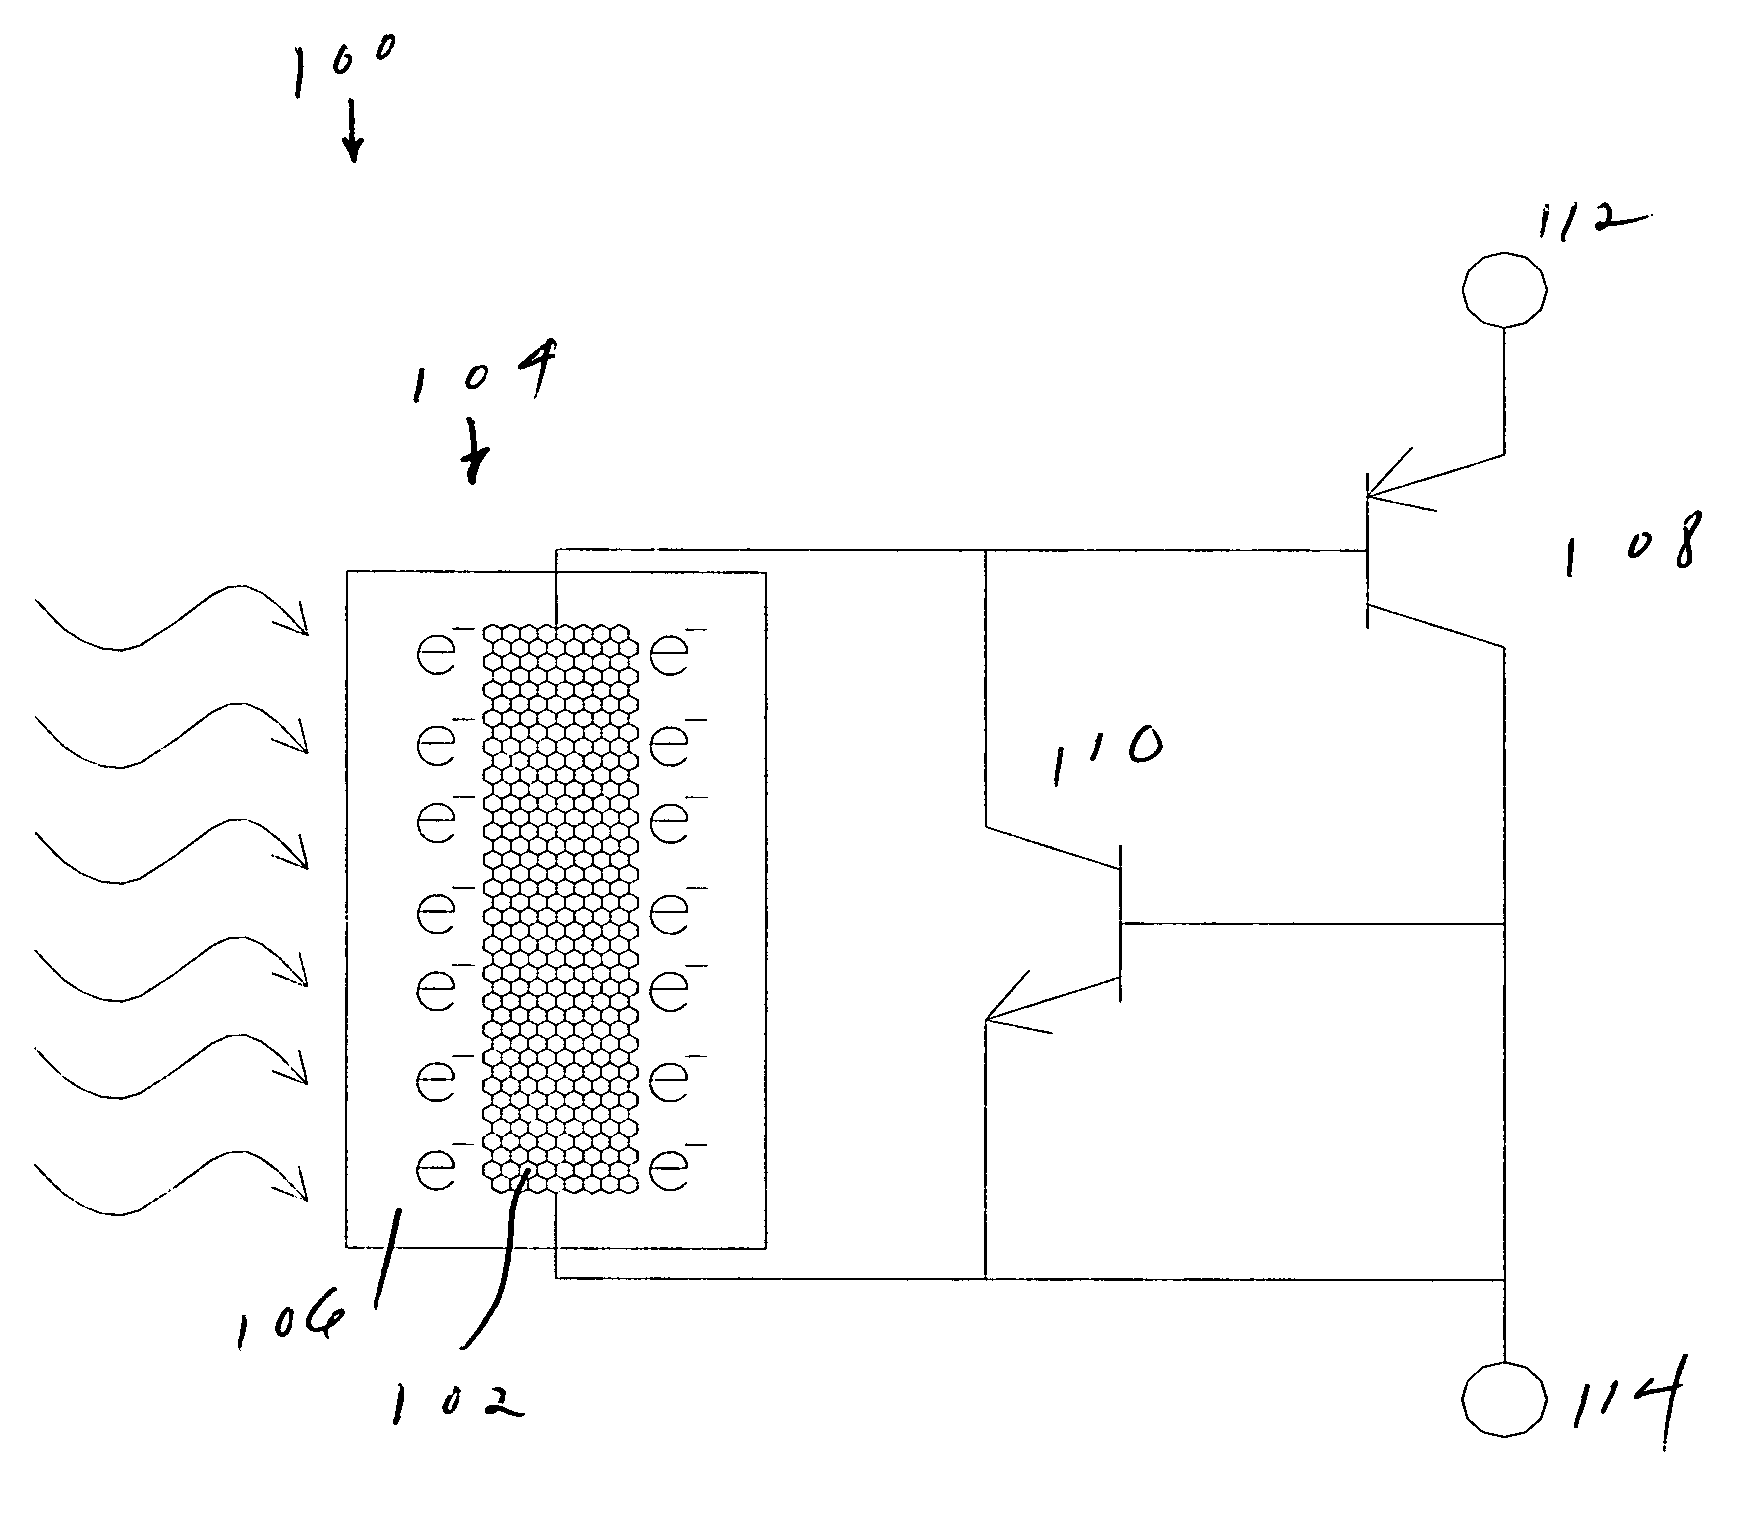 Optically controlled electrical switching device based on wide bandgap semiconductors